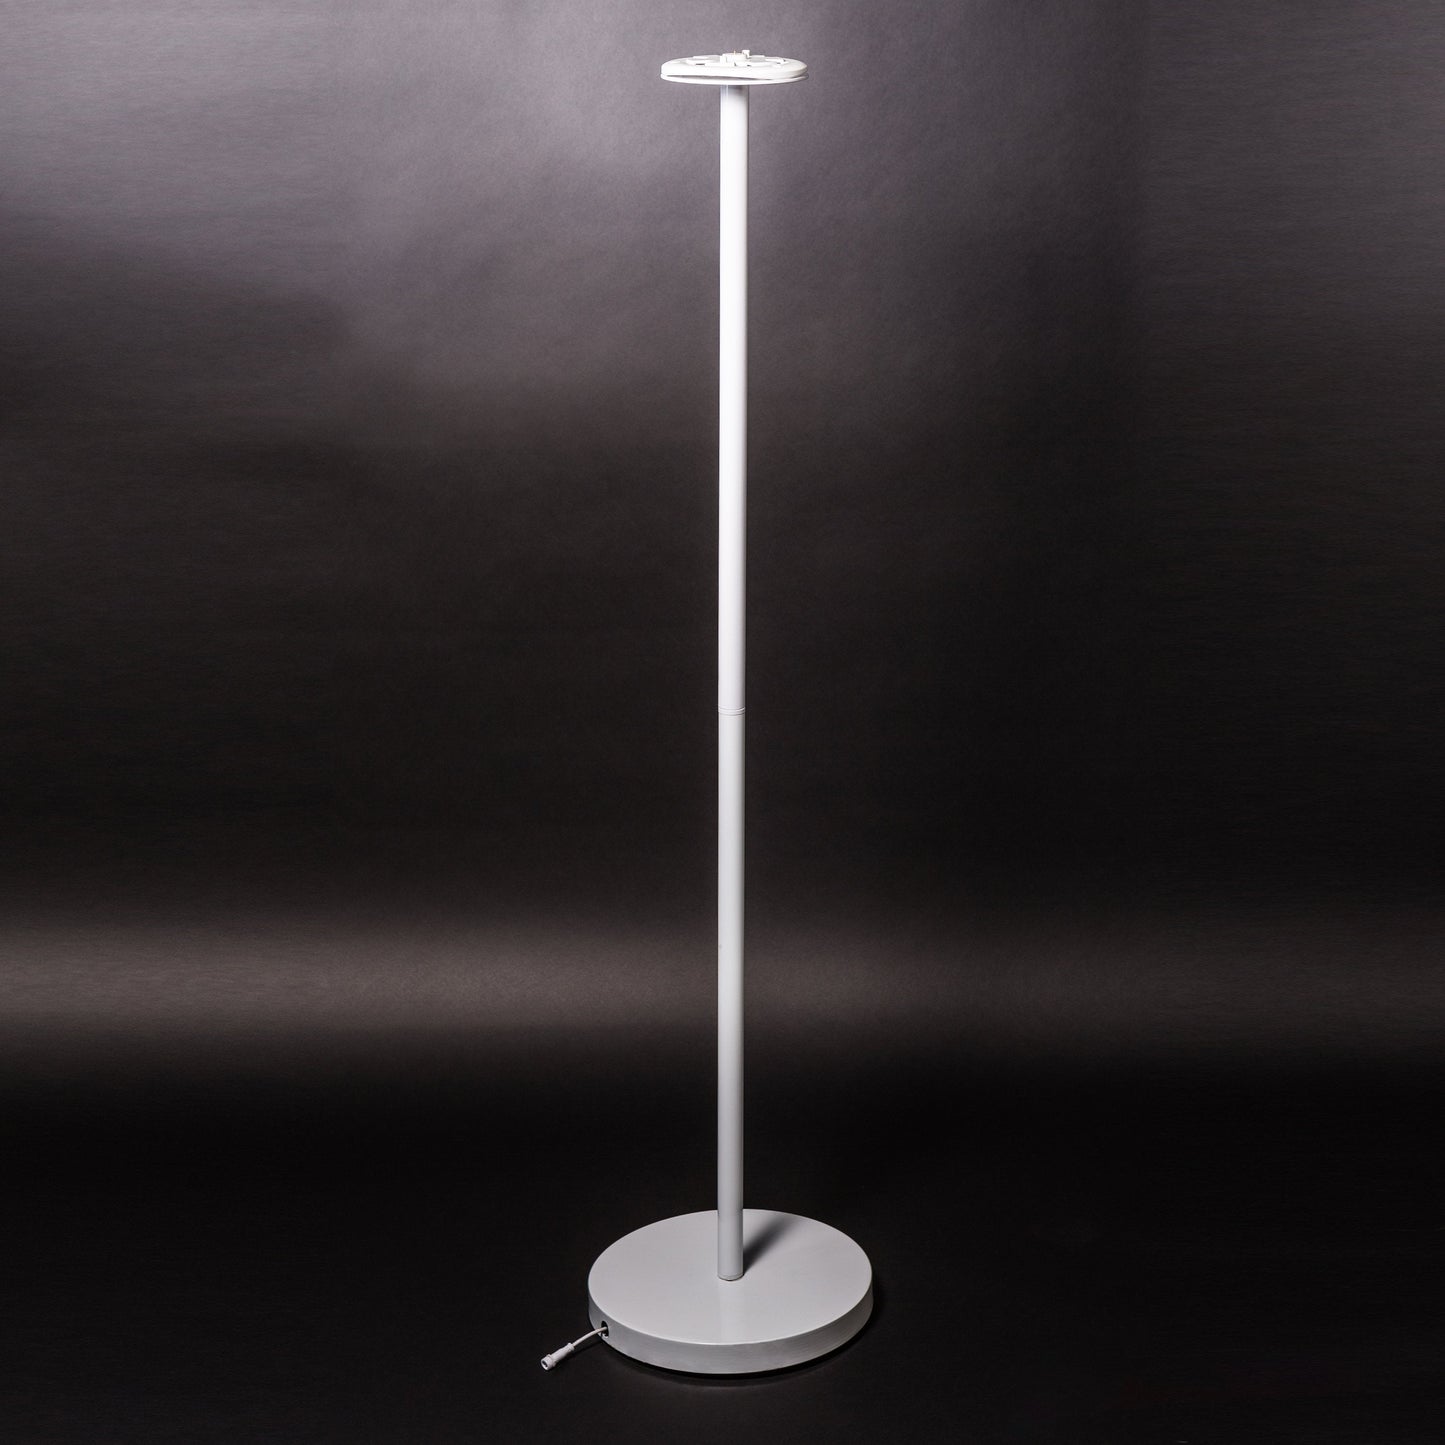 Amande Corde Outdoor Bluetooth LED Table Lamp